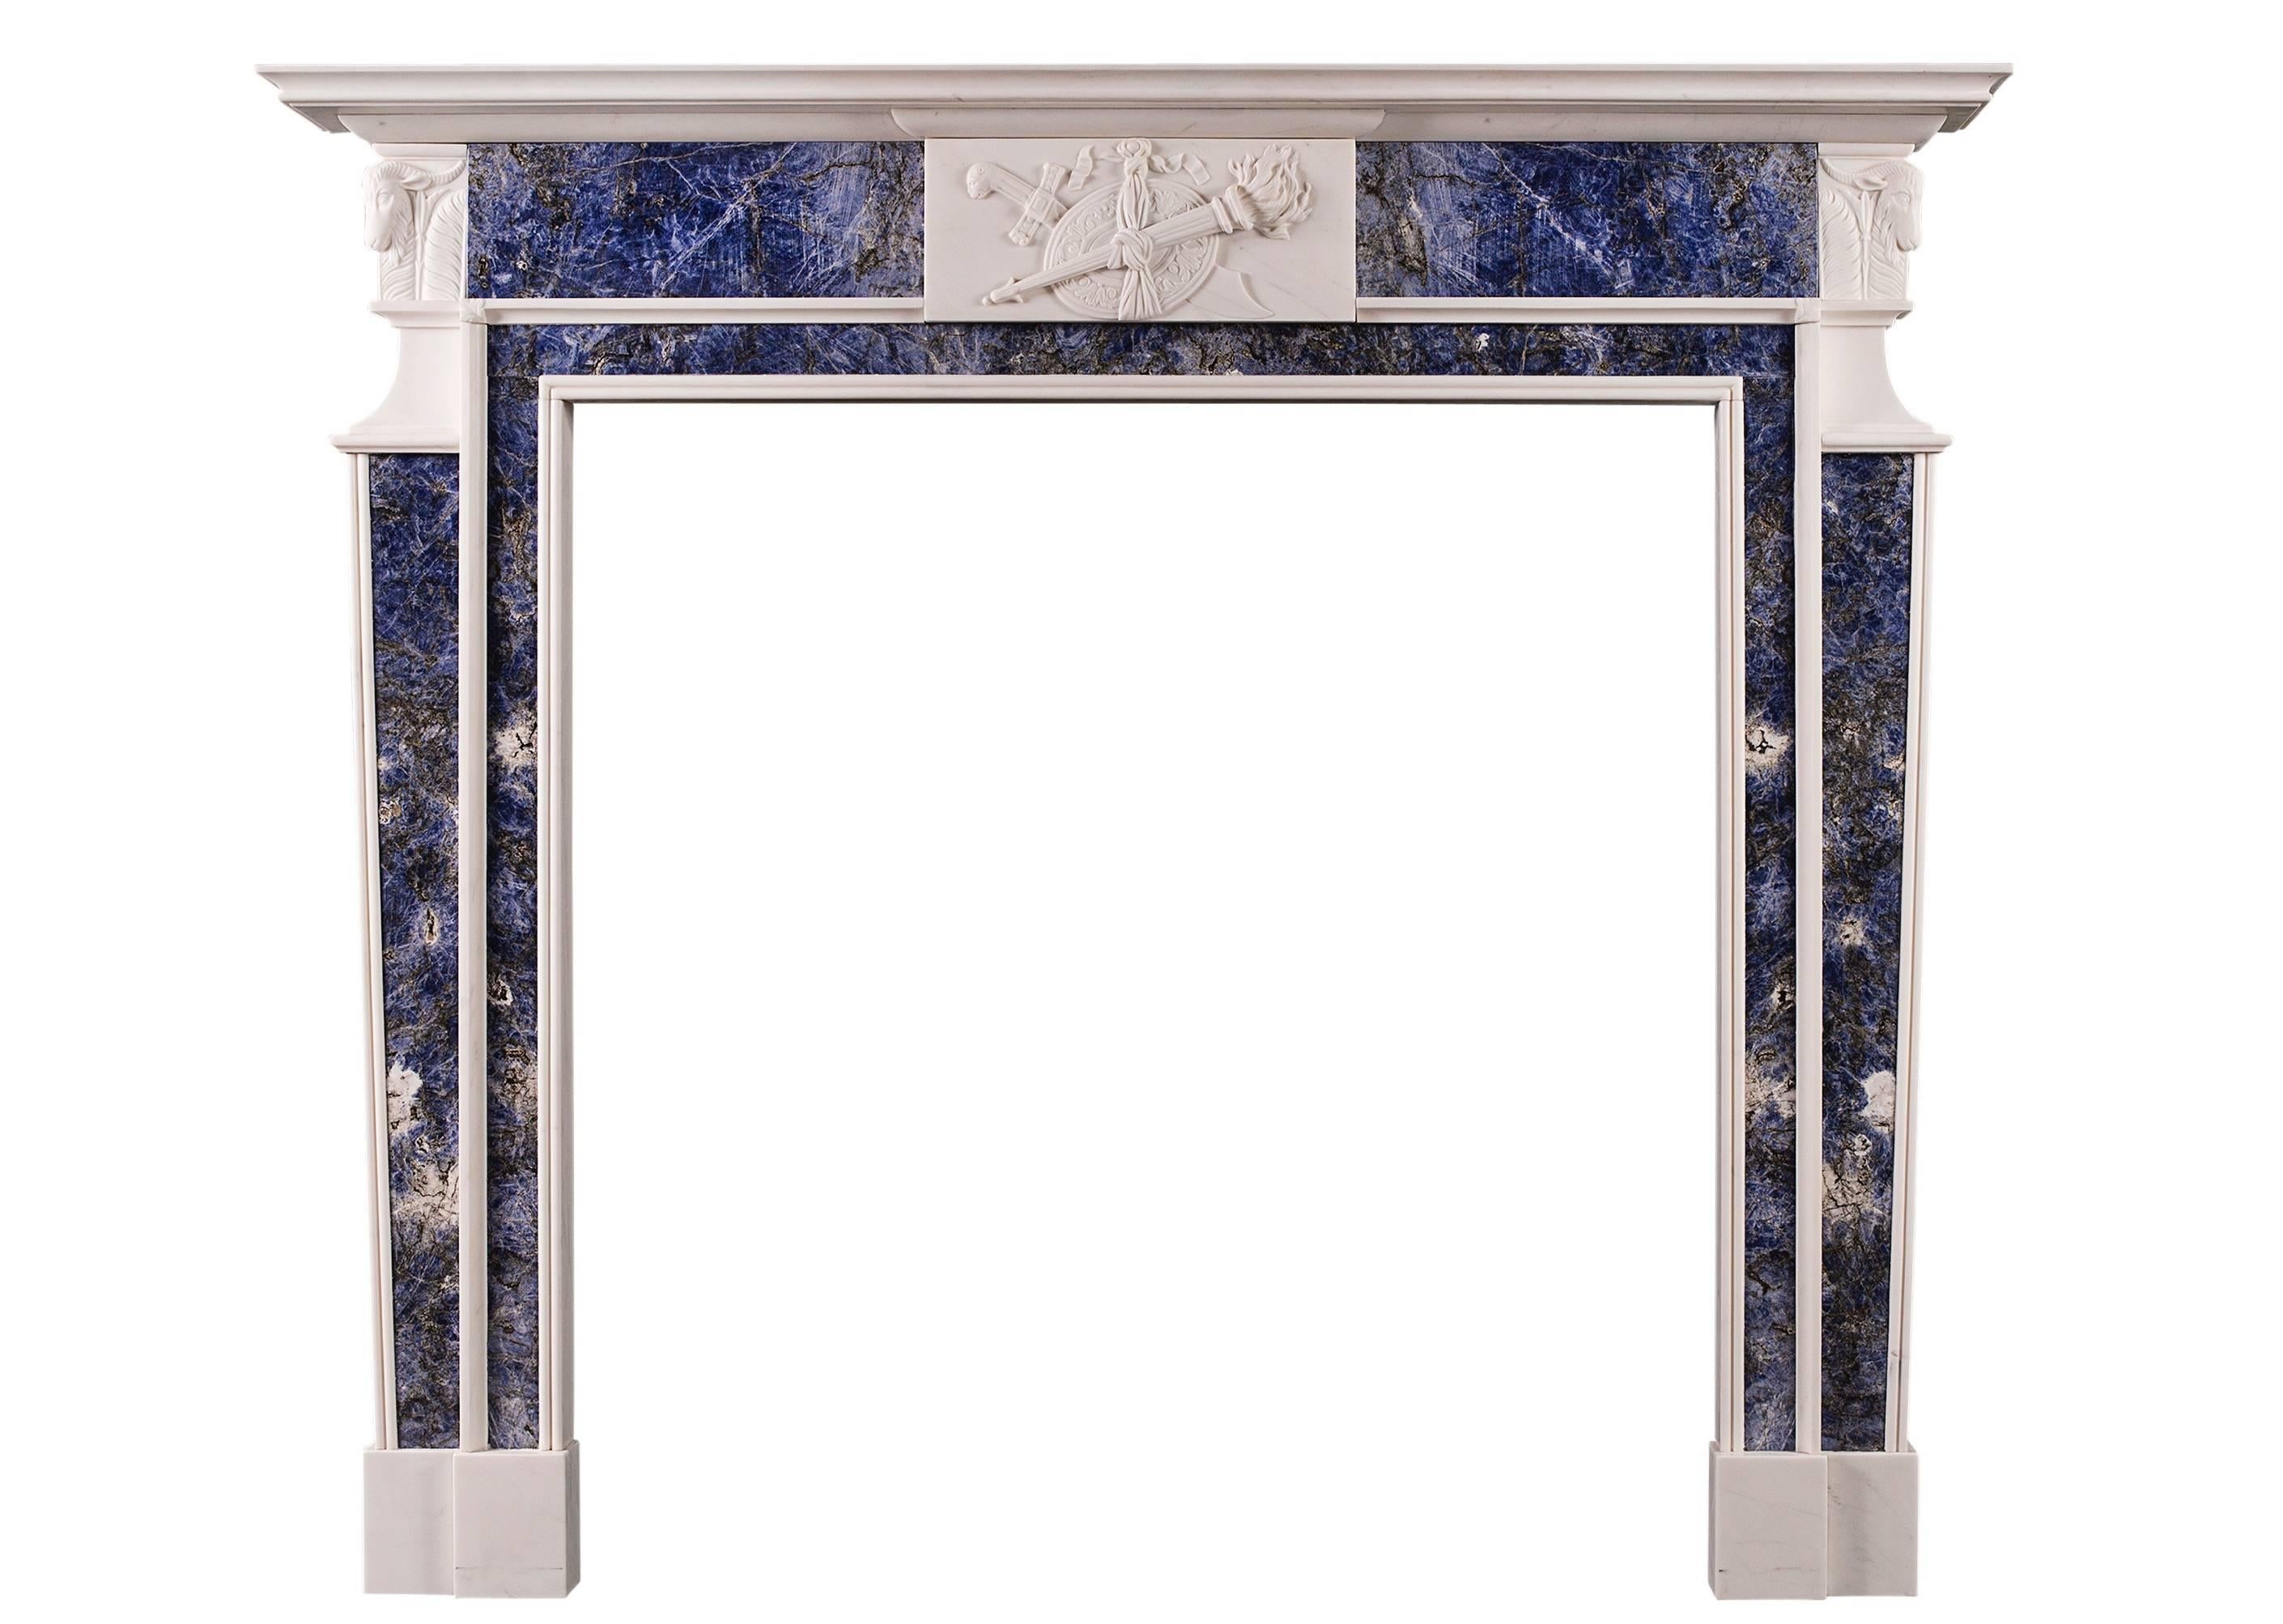 A charming late Georgian style carved white marble fireplace with striking rich blue marble inlay. The centre tablet finely carved with torch, sword, shield and ribbons. The side blocking embellished with angled rams heads and acanthus leaves. A